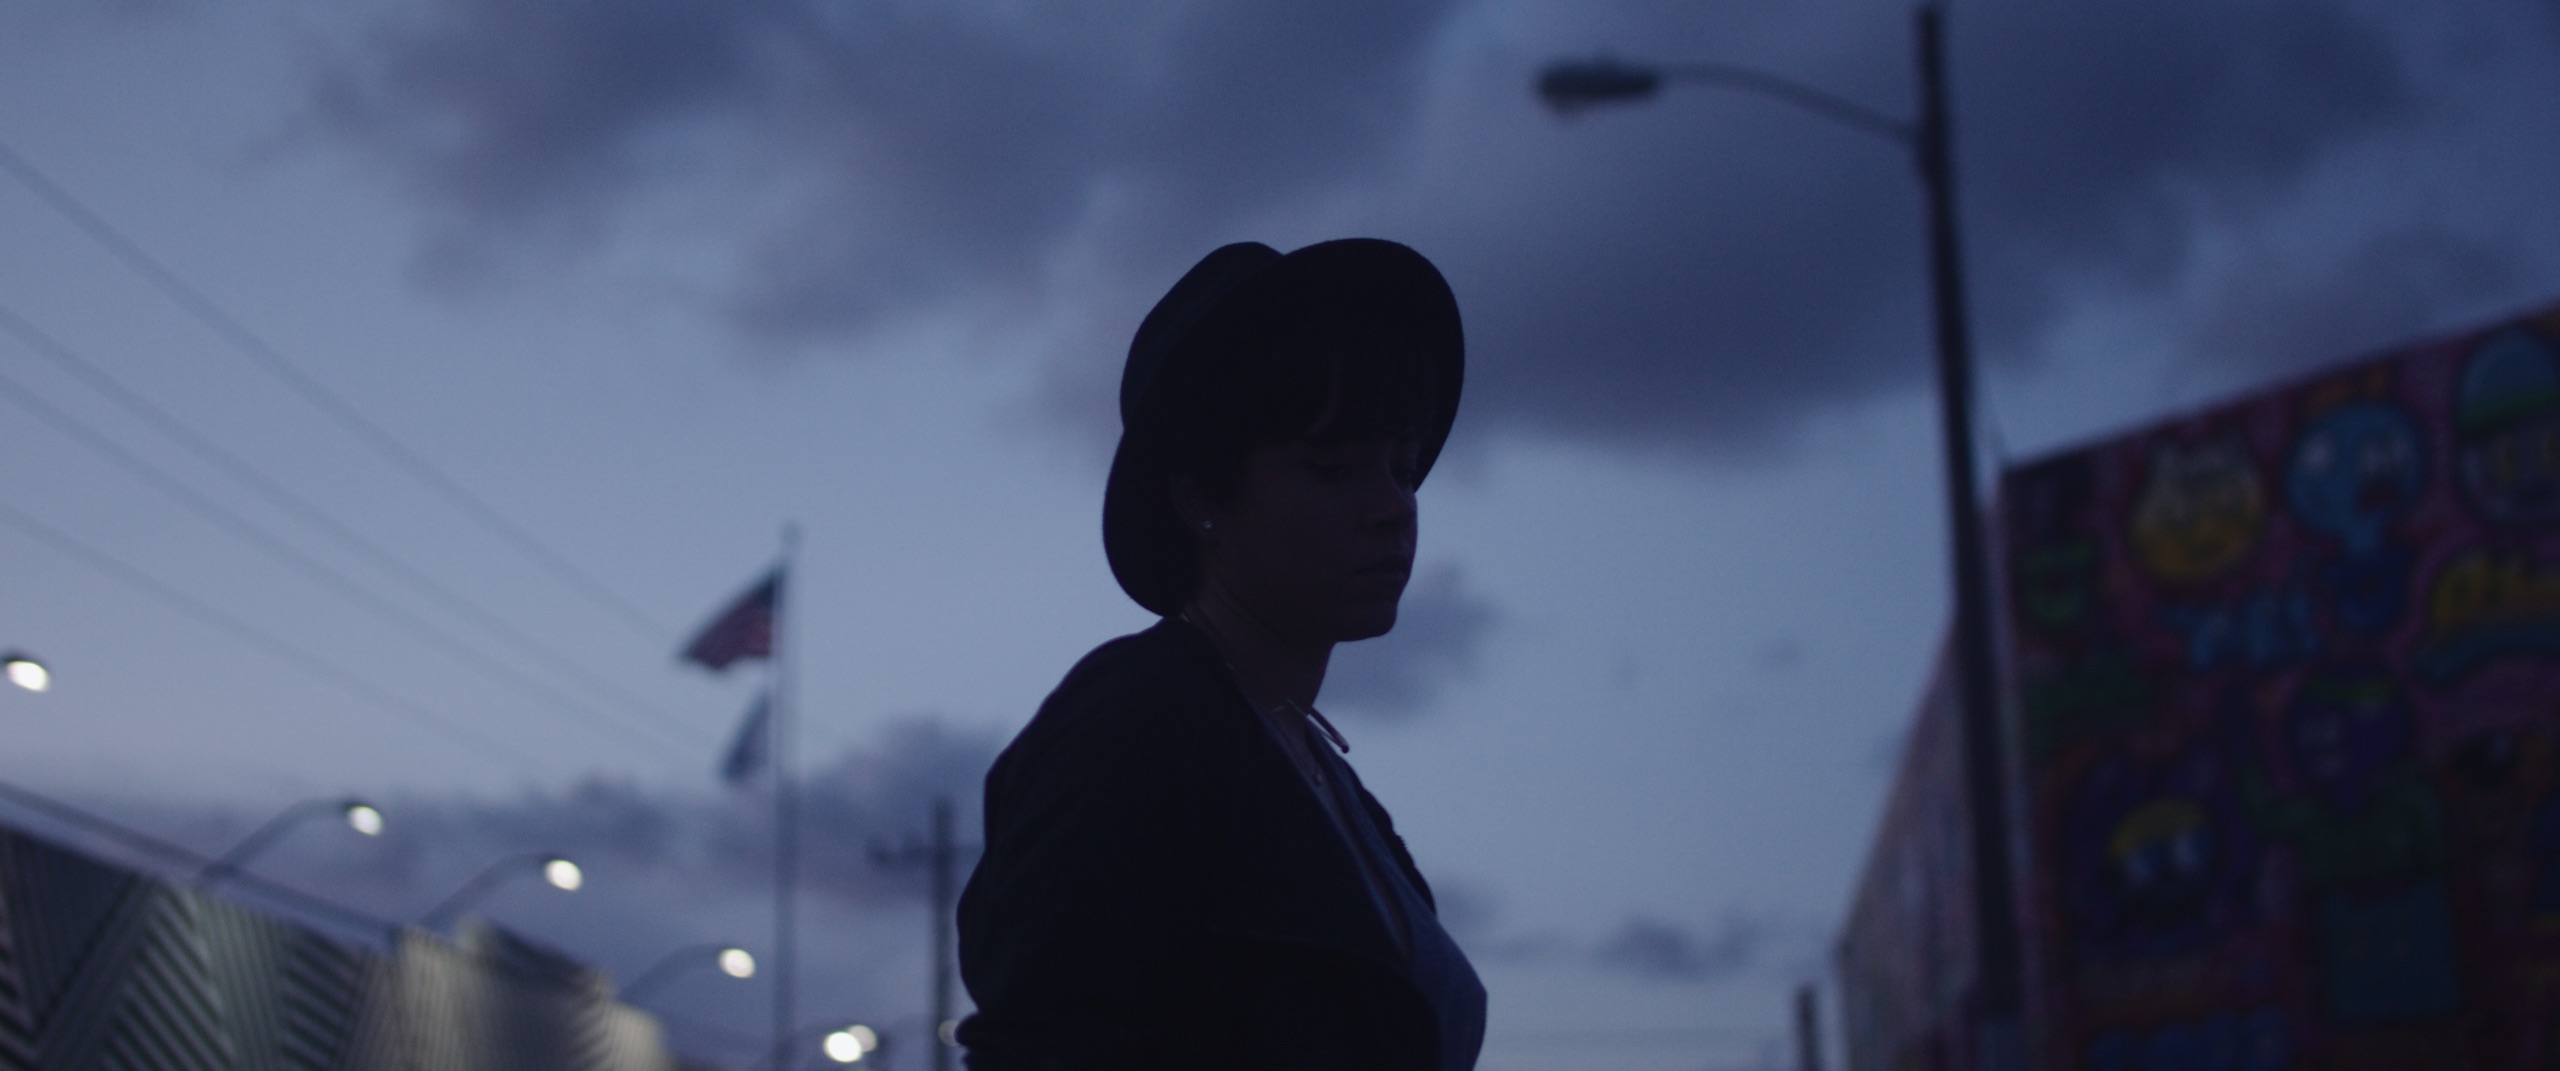 From Miami I Love You Side profile silhouette of woman wearing a hat looking down on a street in semi darkness